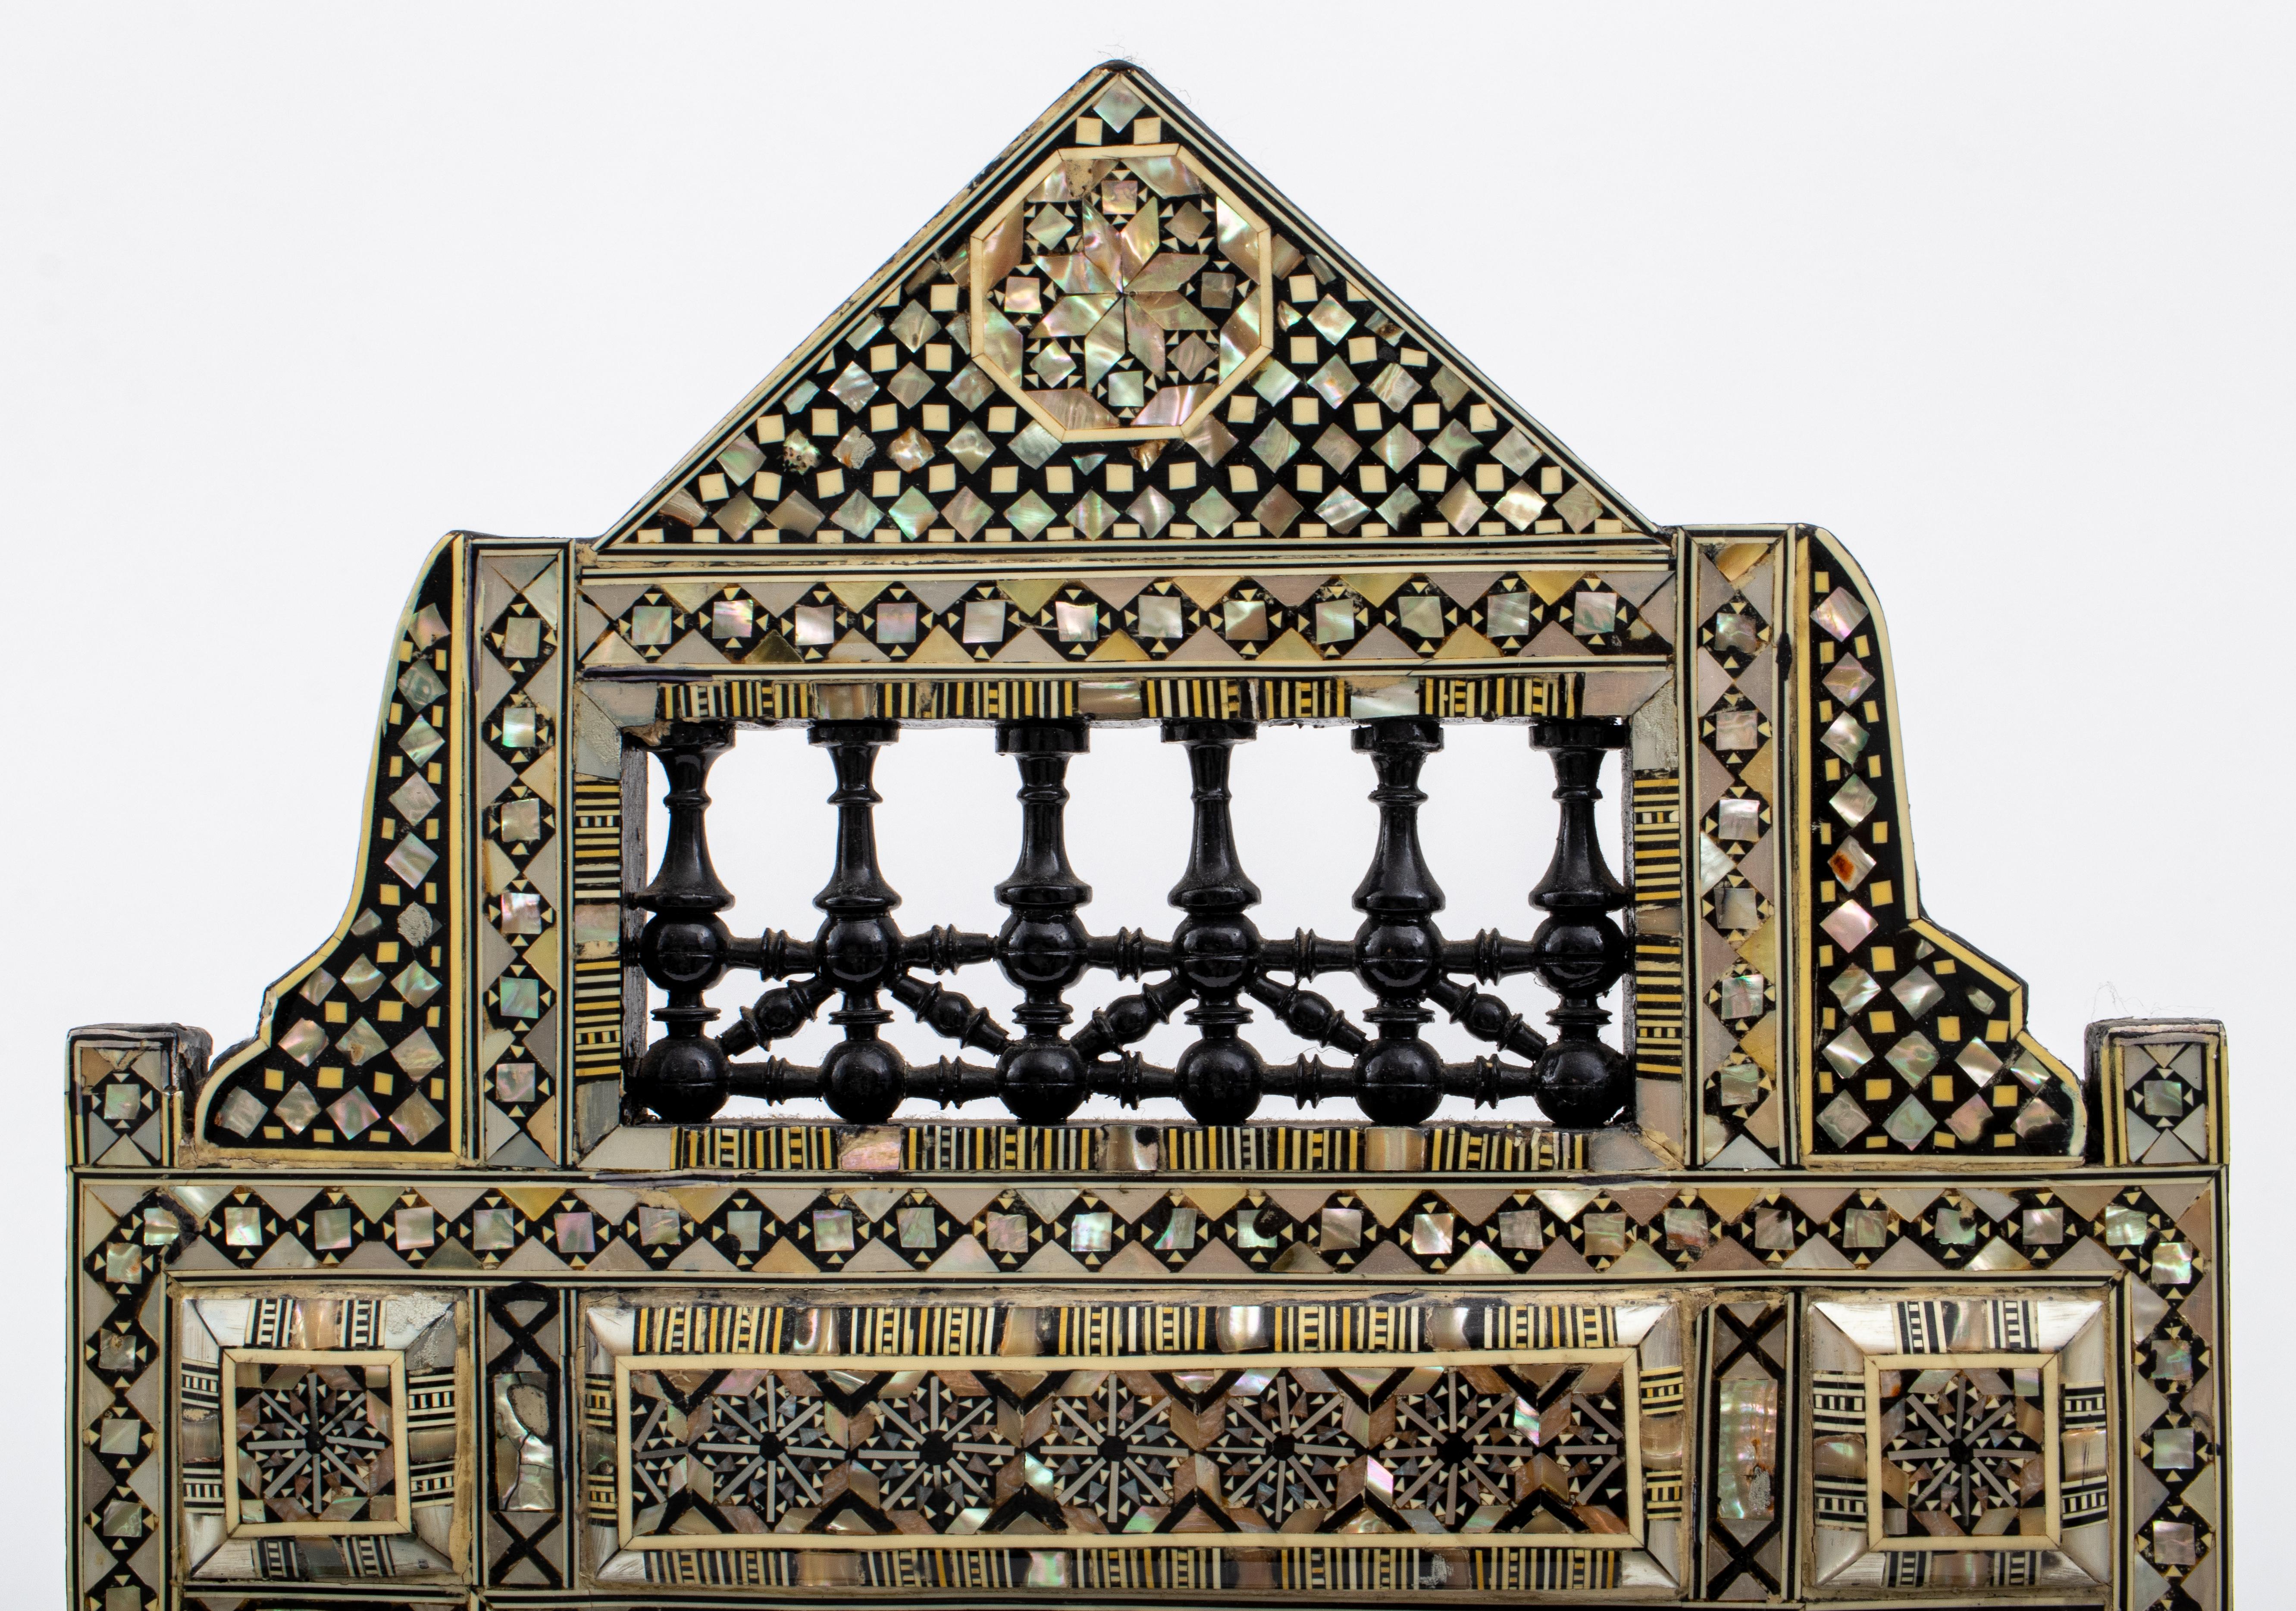 Levantine mother-of-pearl & ebony marquetry mirror, with triangular openwork pediment with turned fretwork, the whole veneered with applied geometric marquetry decoration, centering a beveled rectangular mirror. 
Measures: 20.5